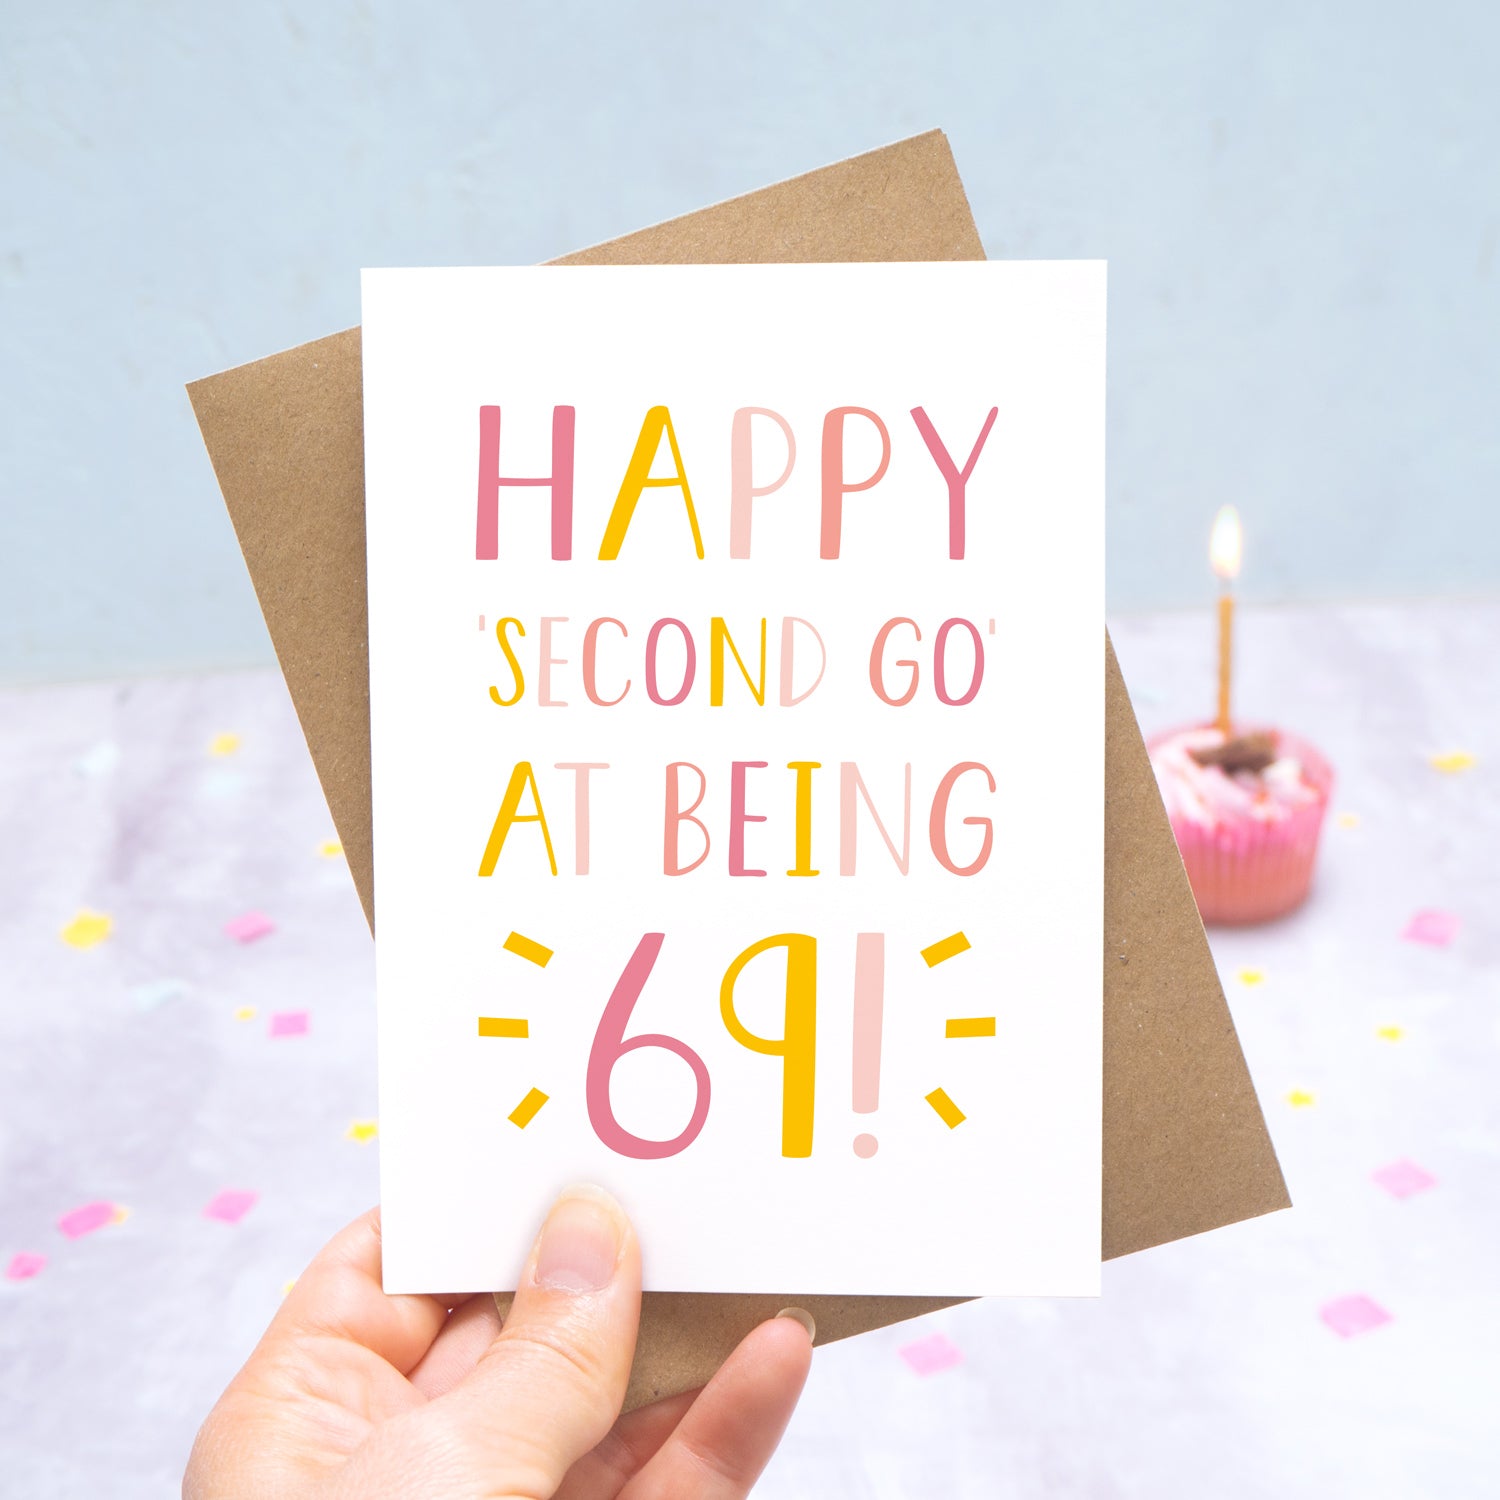 Happy second go at being 69 - milestone age card in pink photographed on a grey and blue background with a cupcake and burning candle.